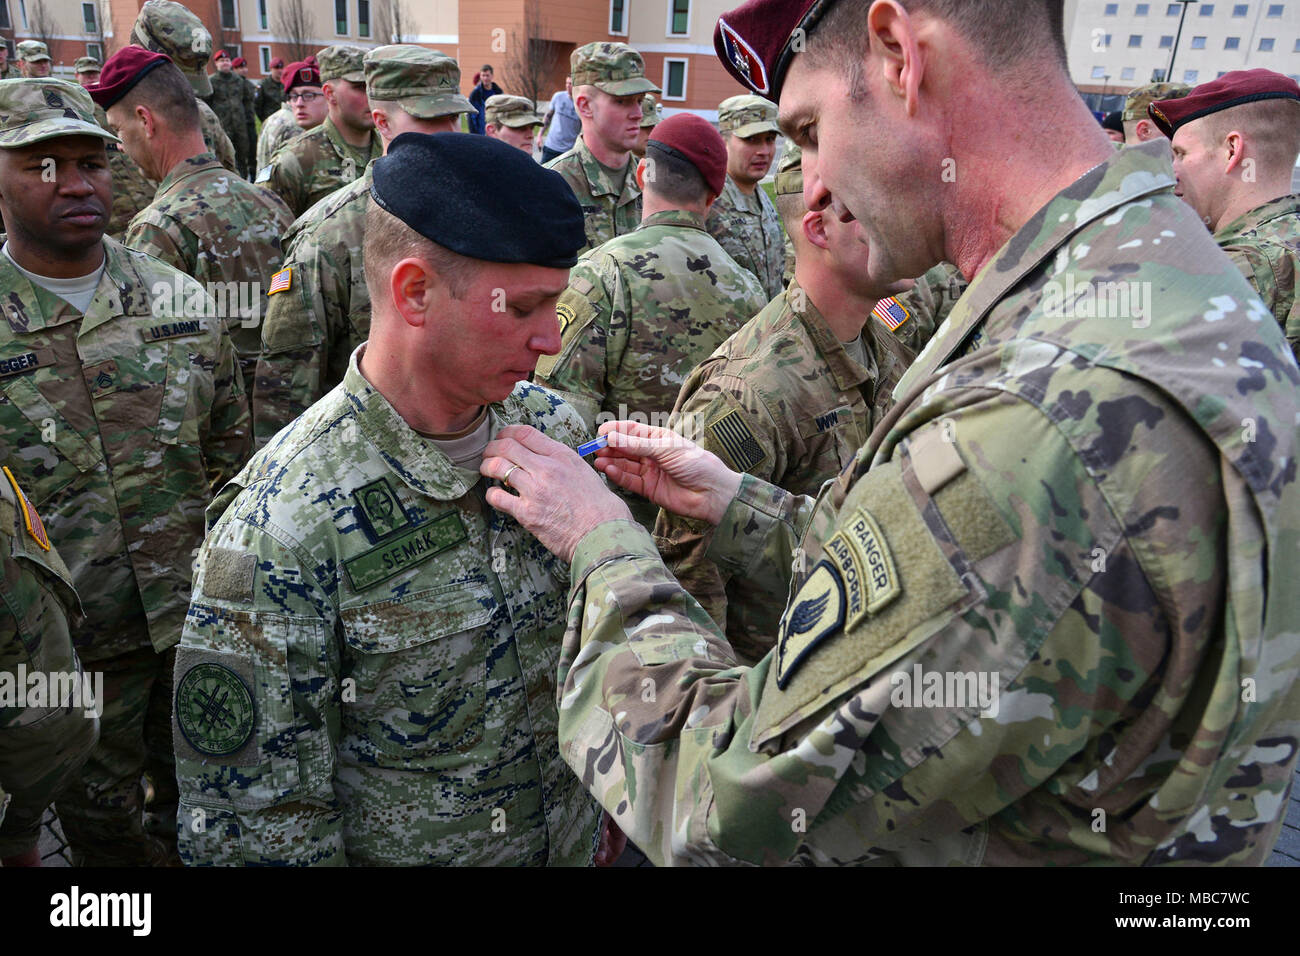 Col. James B. Bartholomees III, Commander of the 173rd Airborne Brigade (right) , pins the Expert Infantryman Badge (EIB) on a Croatian Army Soldier during the Expert Infantryman Badge (EIB) ceremony at Caserma Del Din, Vicenza, Italy, 15 Feb. 2018. (U.S. Army Stock Photo